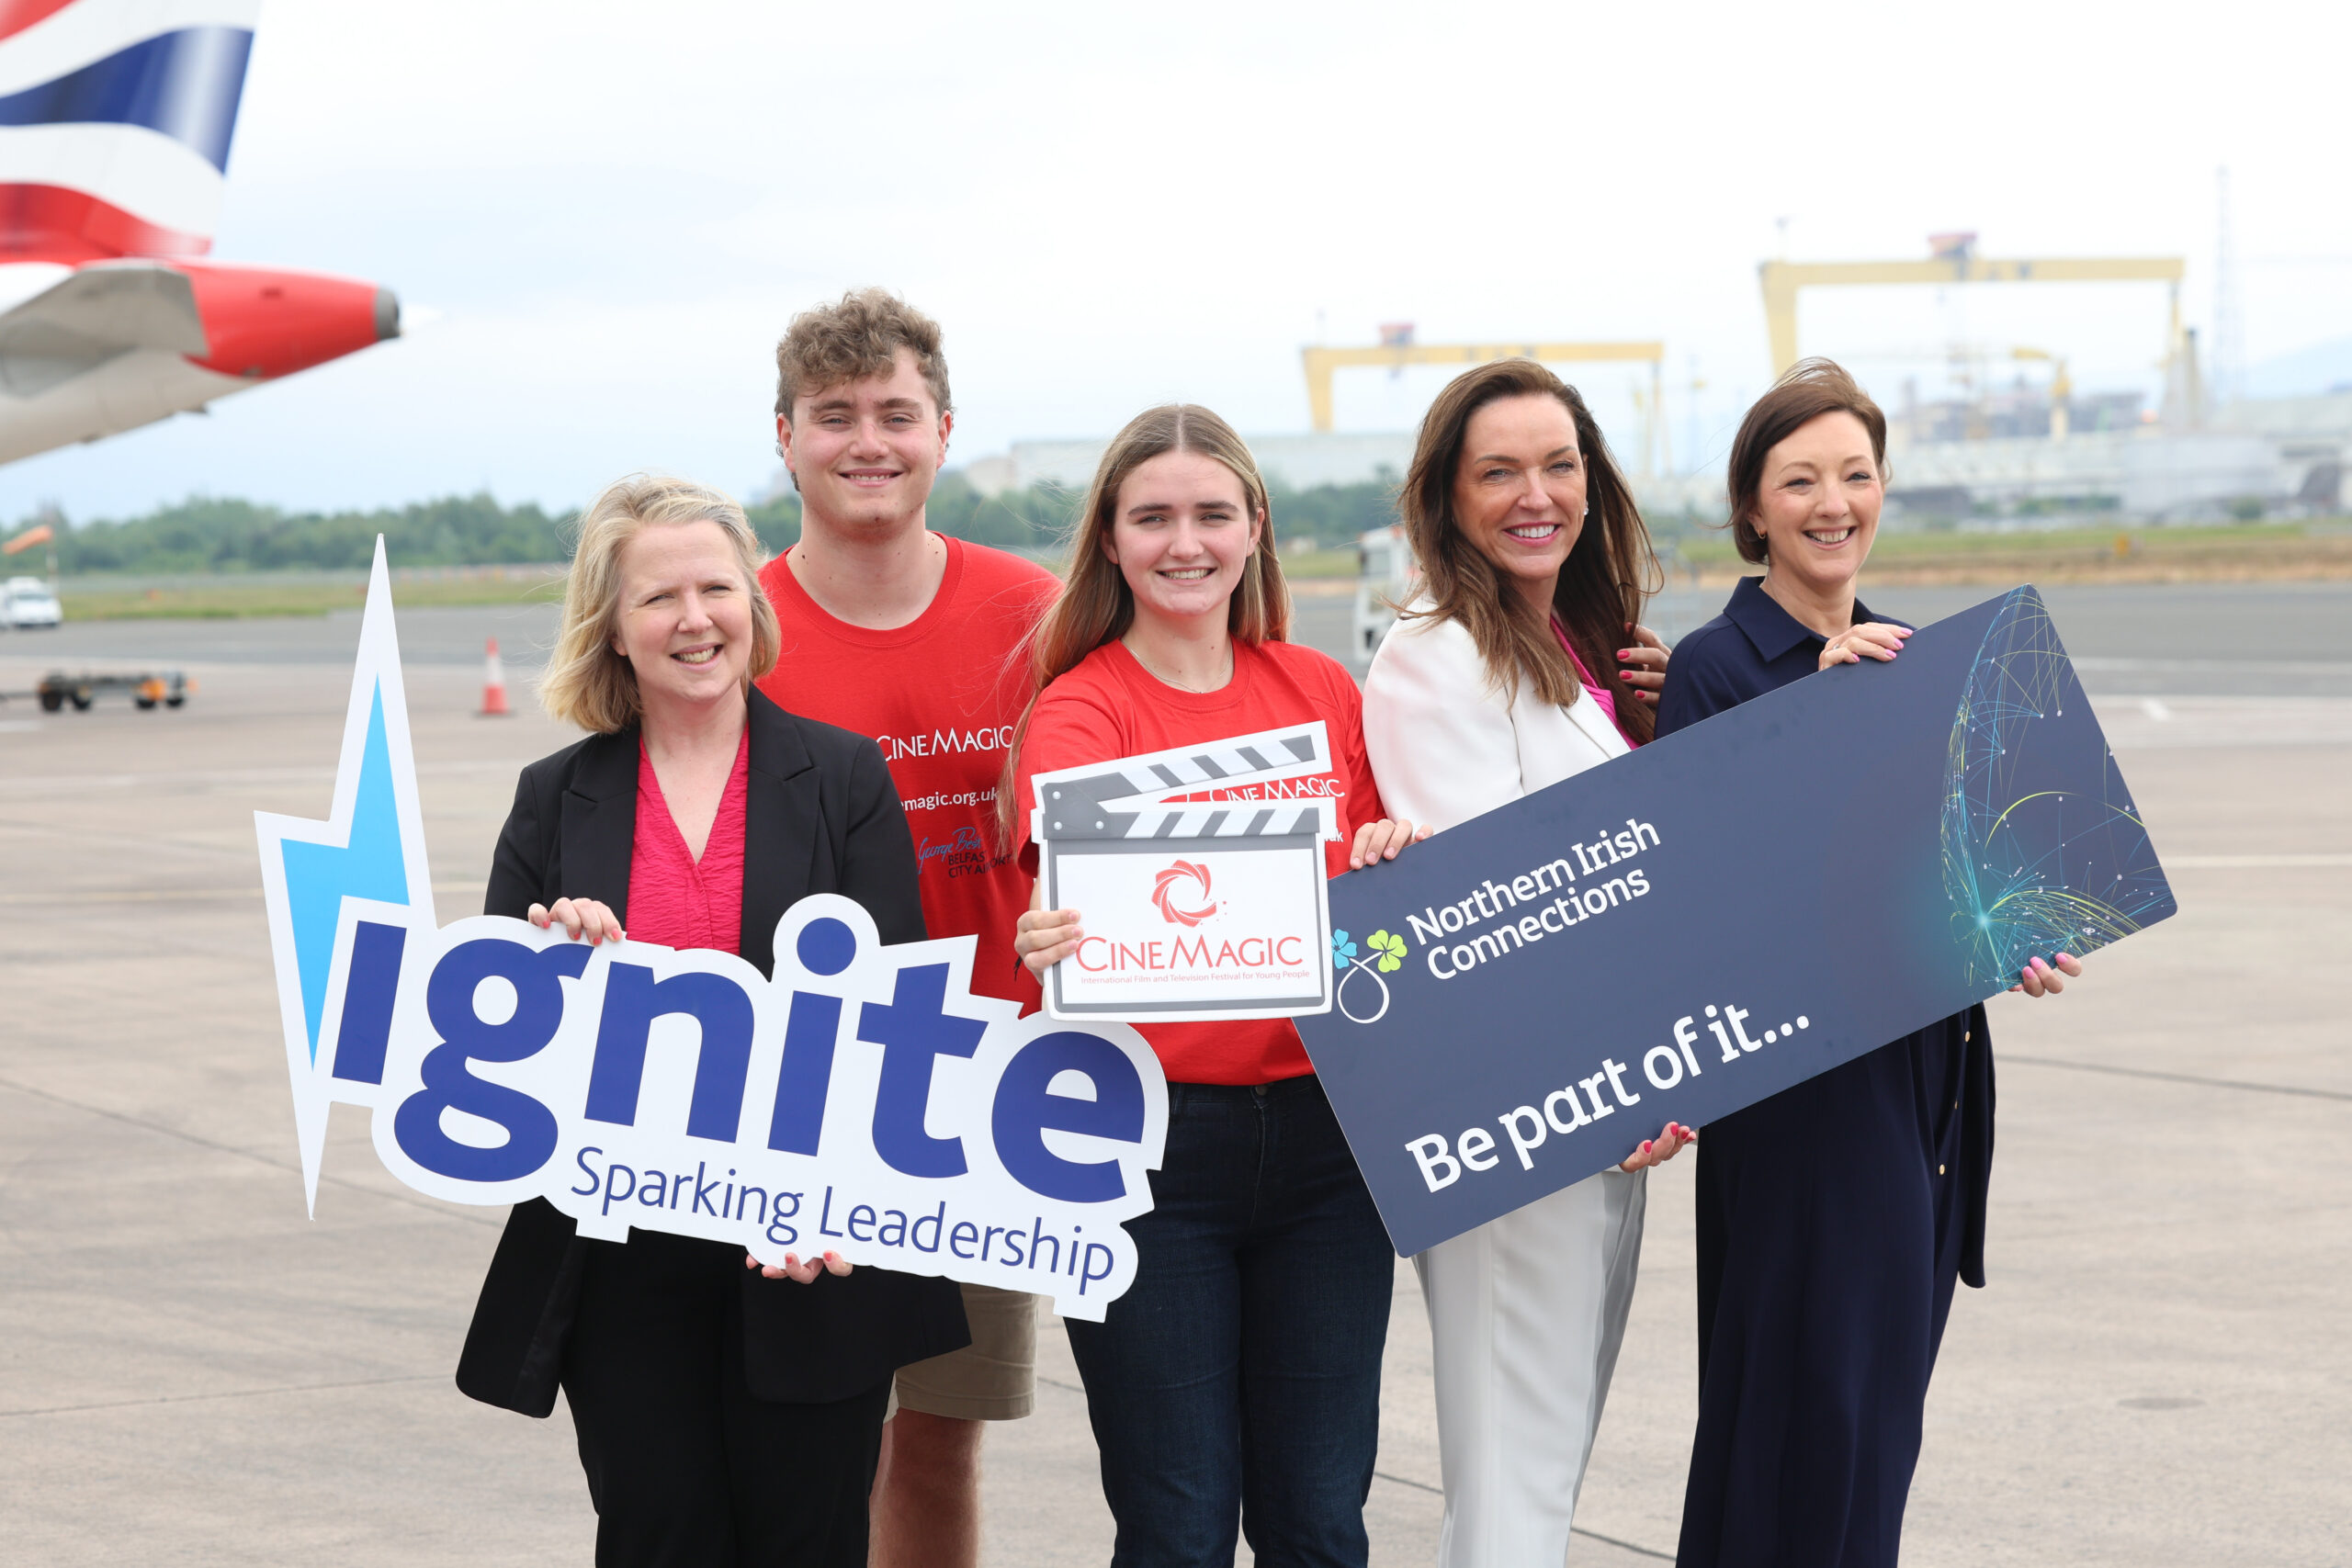 Pictured L-R marking the announcement are Ignite participant Paula Bittles, Belfast City Airport, Ignite participants Robbie Hayes and Zara Burney Keatings, Joan Burney Keatings MBE, Cinemagic, and Moira Loughran, NI Connections. Photo Press Eye/Darren Kidd.